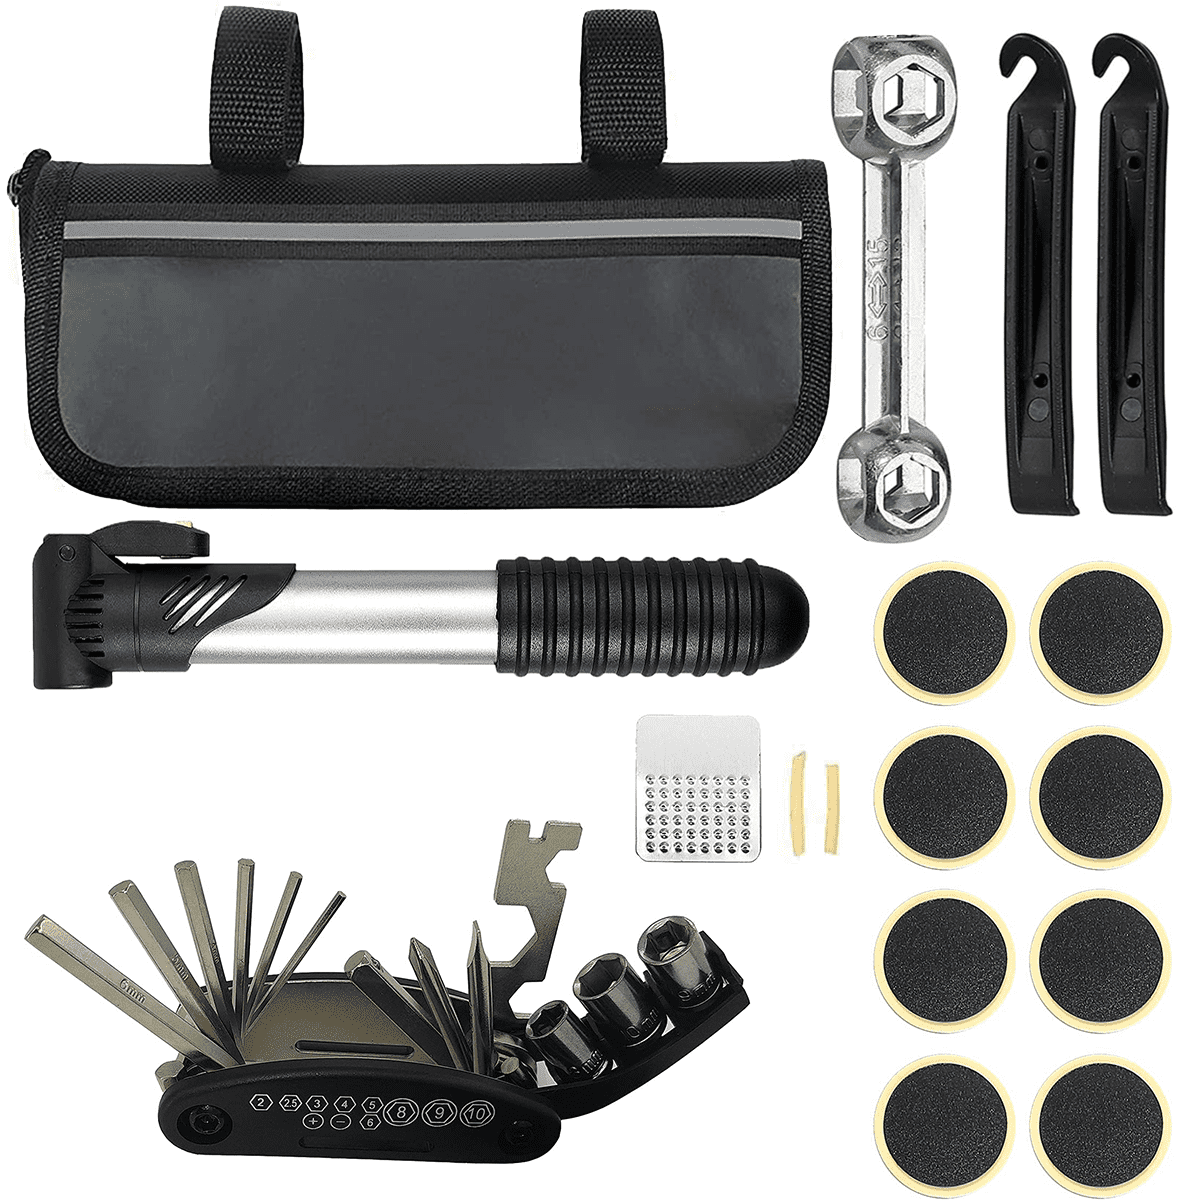 Details about   All In One Bike Multi-Tool Aluminum Bike Bicycle Invisible Repair Tool Set,~ 